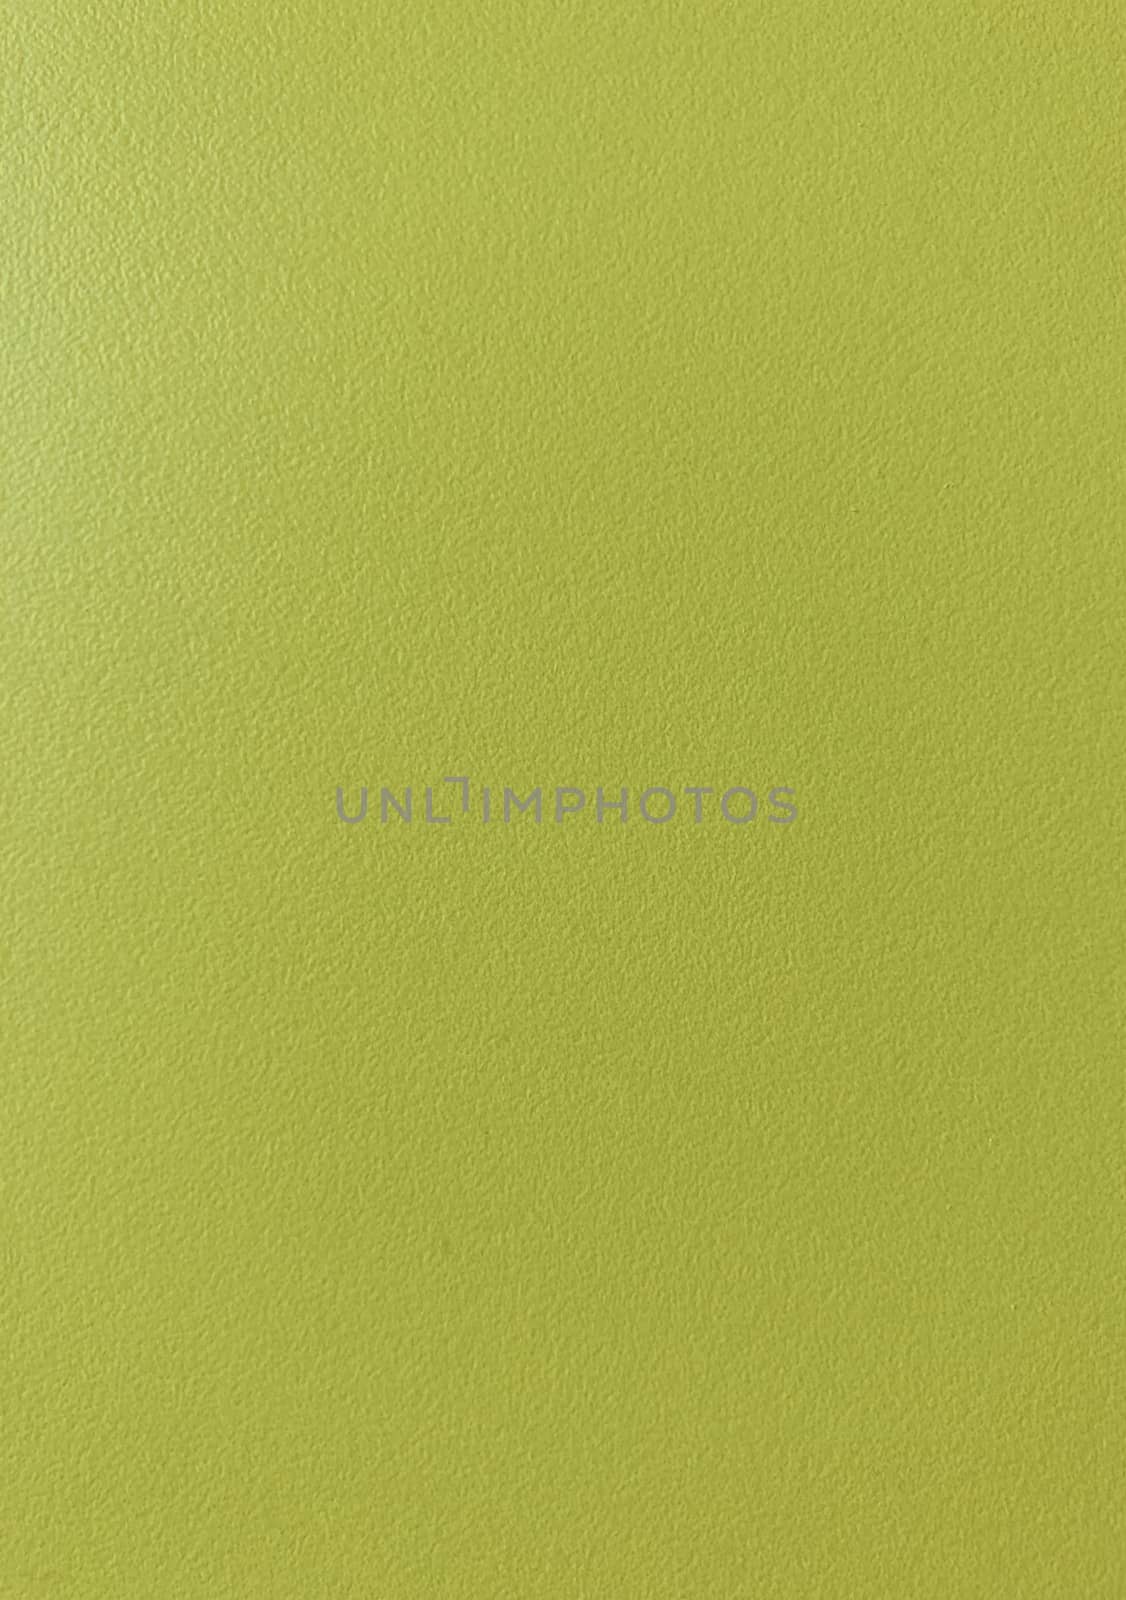 background texture green pastel color bumpy